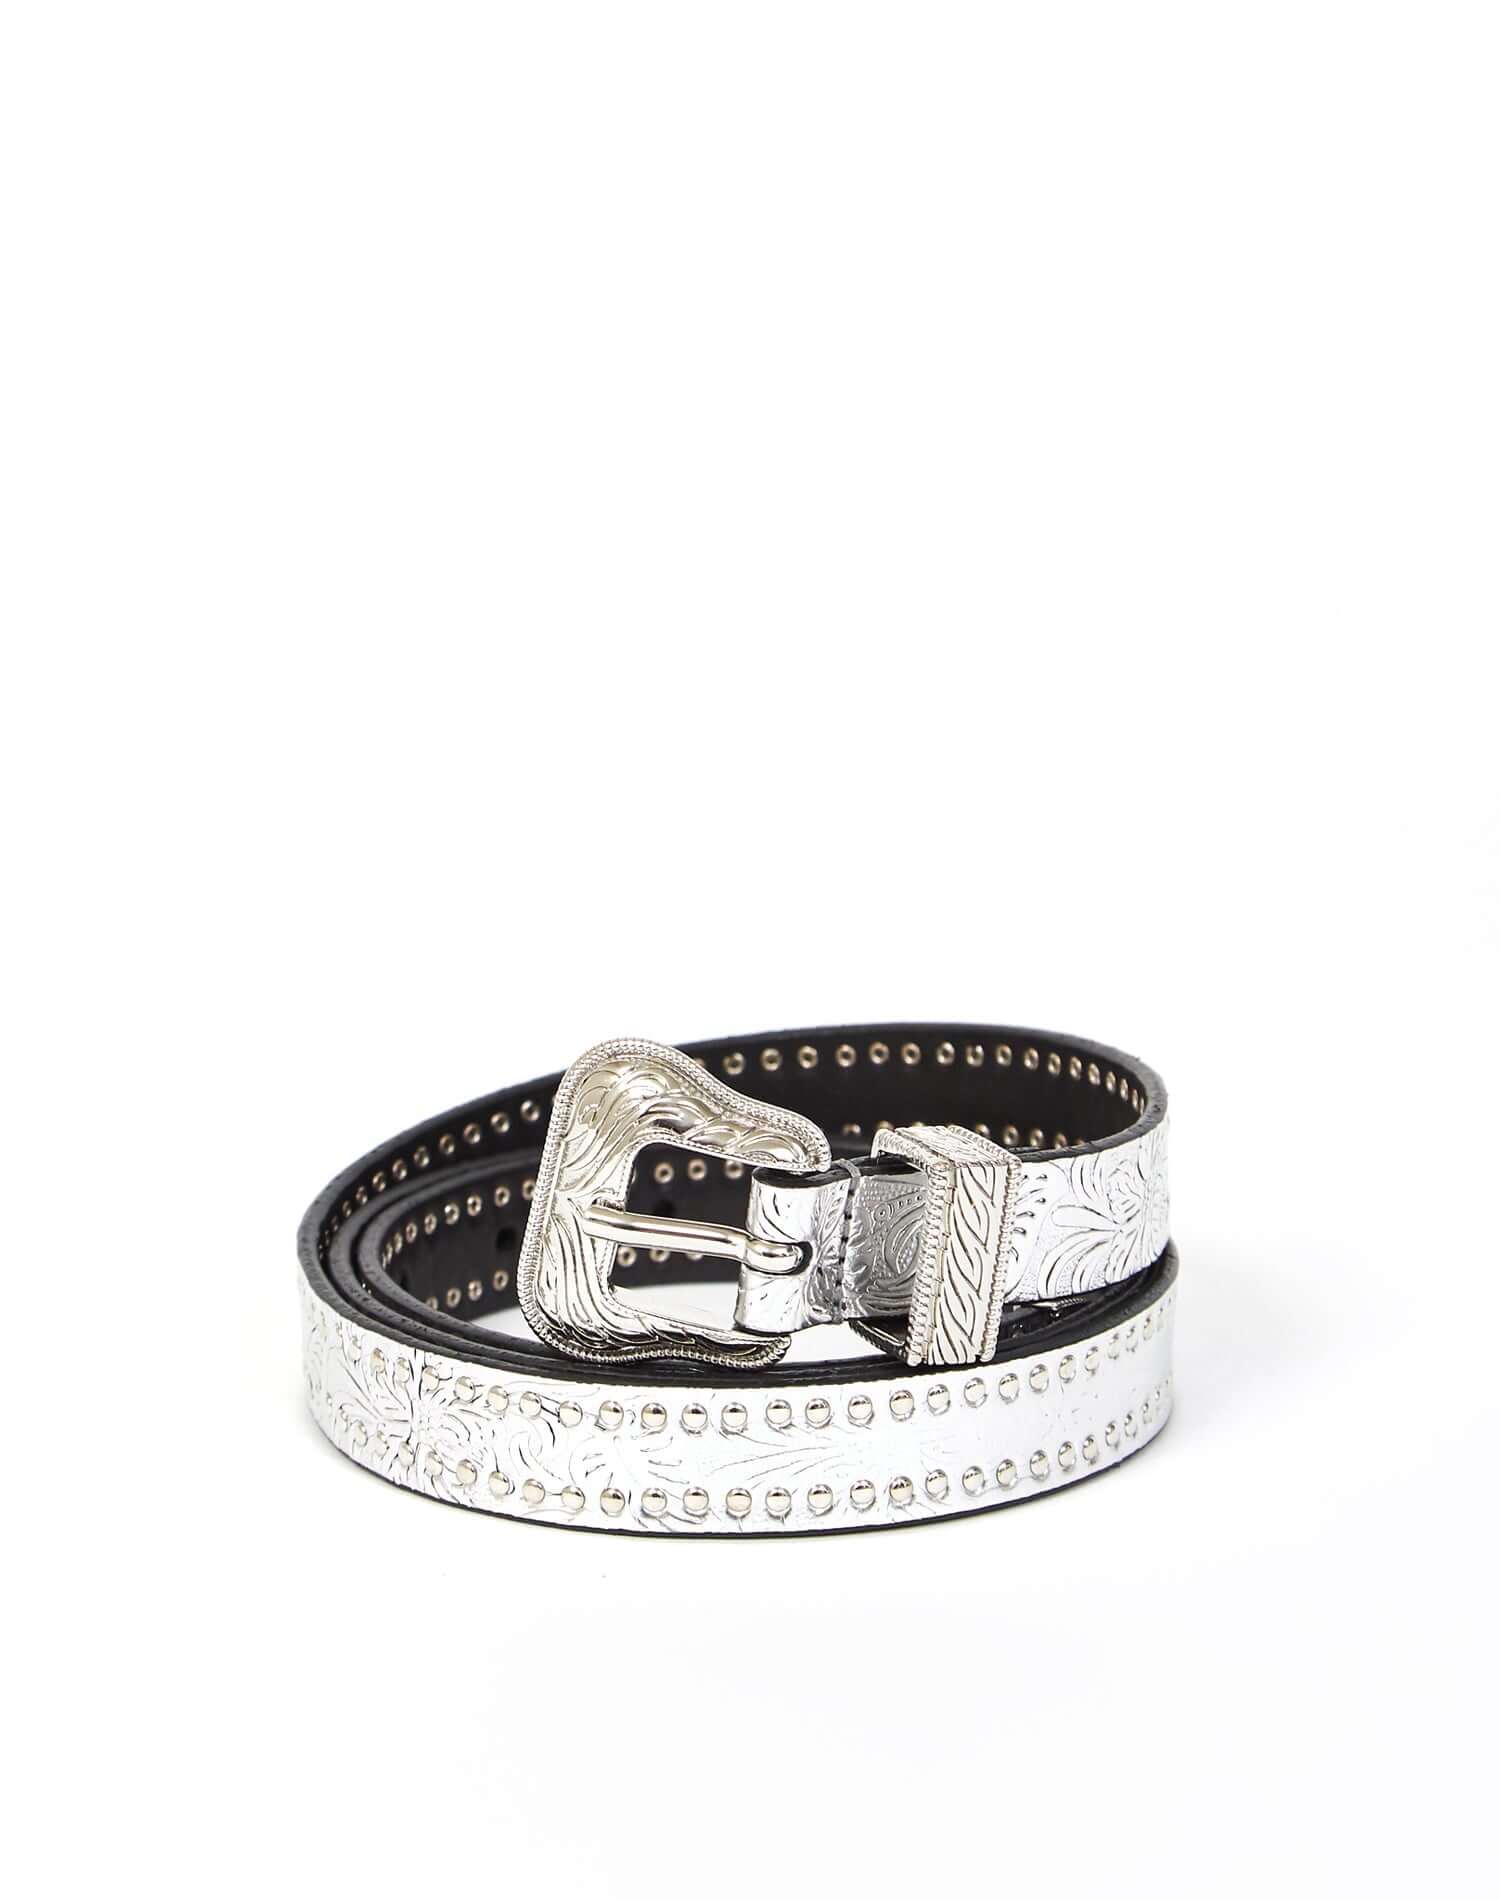 JOANA MINI BELT Silver leather belt with studs on the outline and carved details, buckle and belt loop in shiny metal. Height: 2 cm. Made in Italy. HTC LOS ANGELES